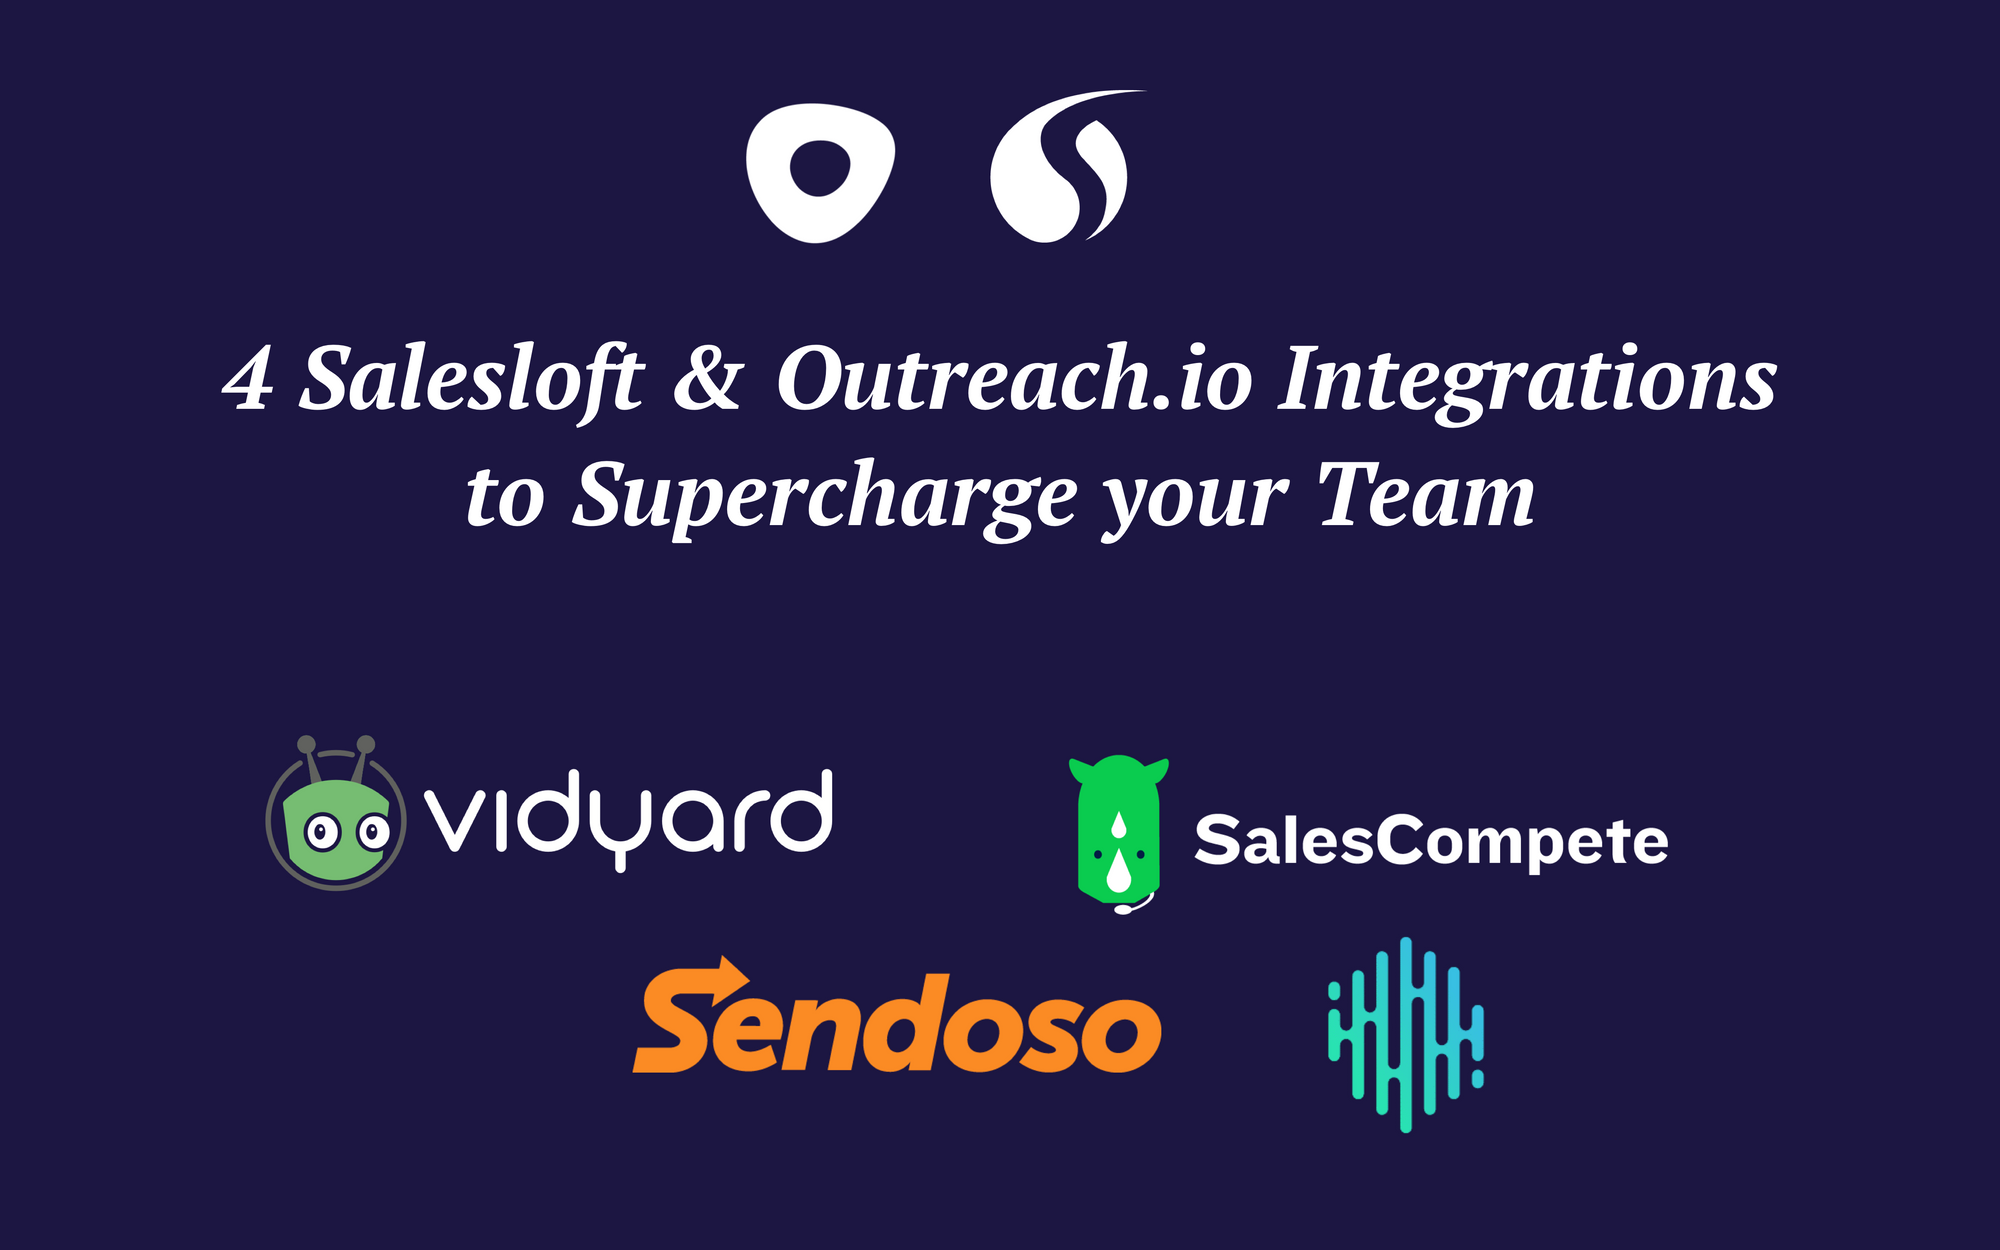 4 Salesloft and Outreach.io Integrations to Supercharge your Sales Team